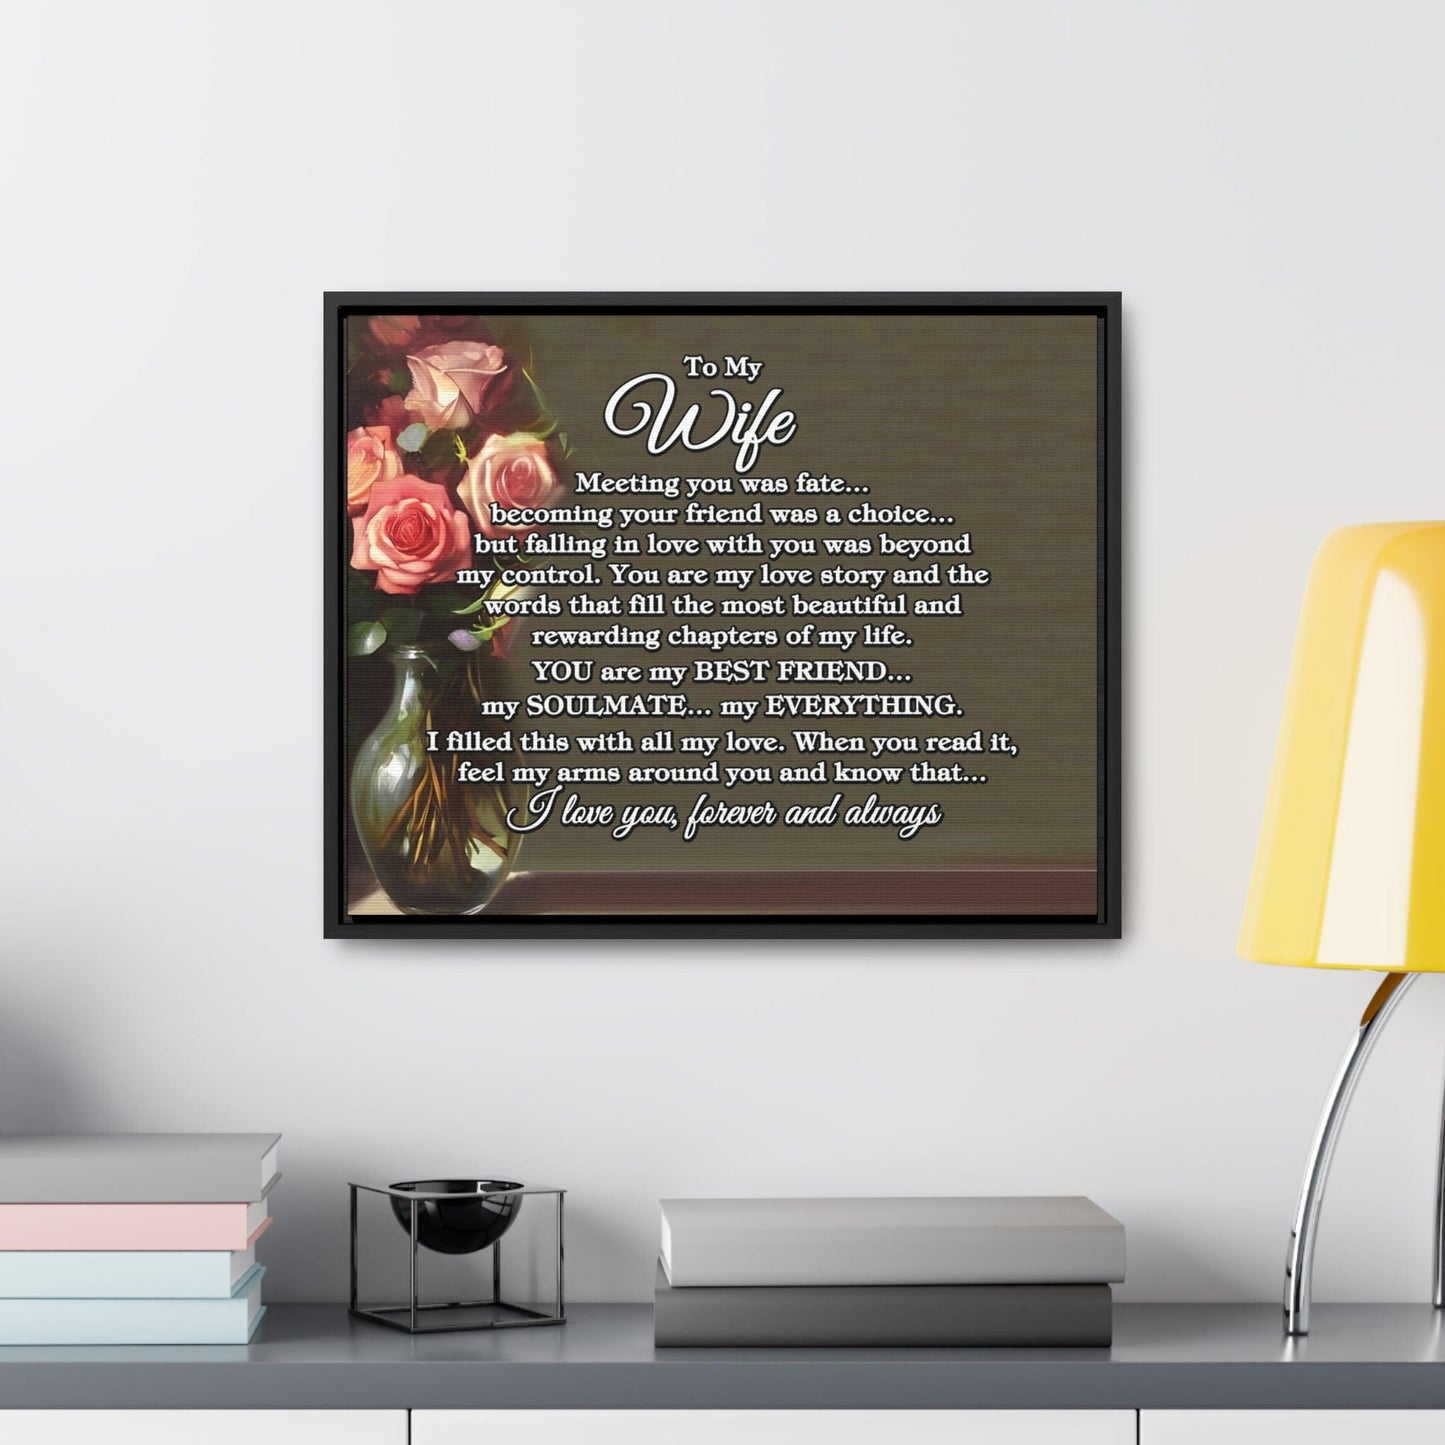 To My Wife "Meeting you was..." Framed Canvas (Roses)